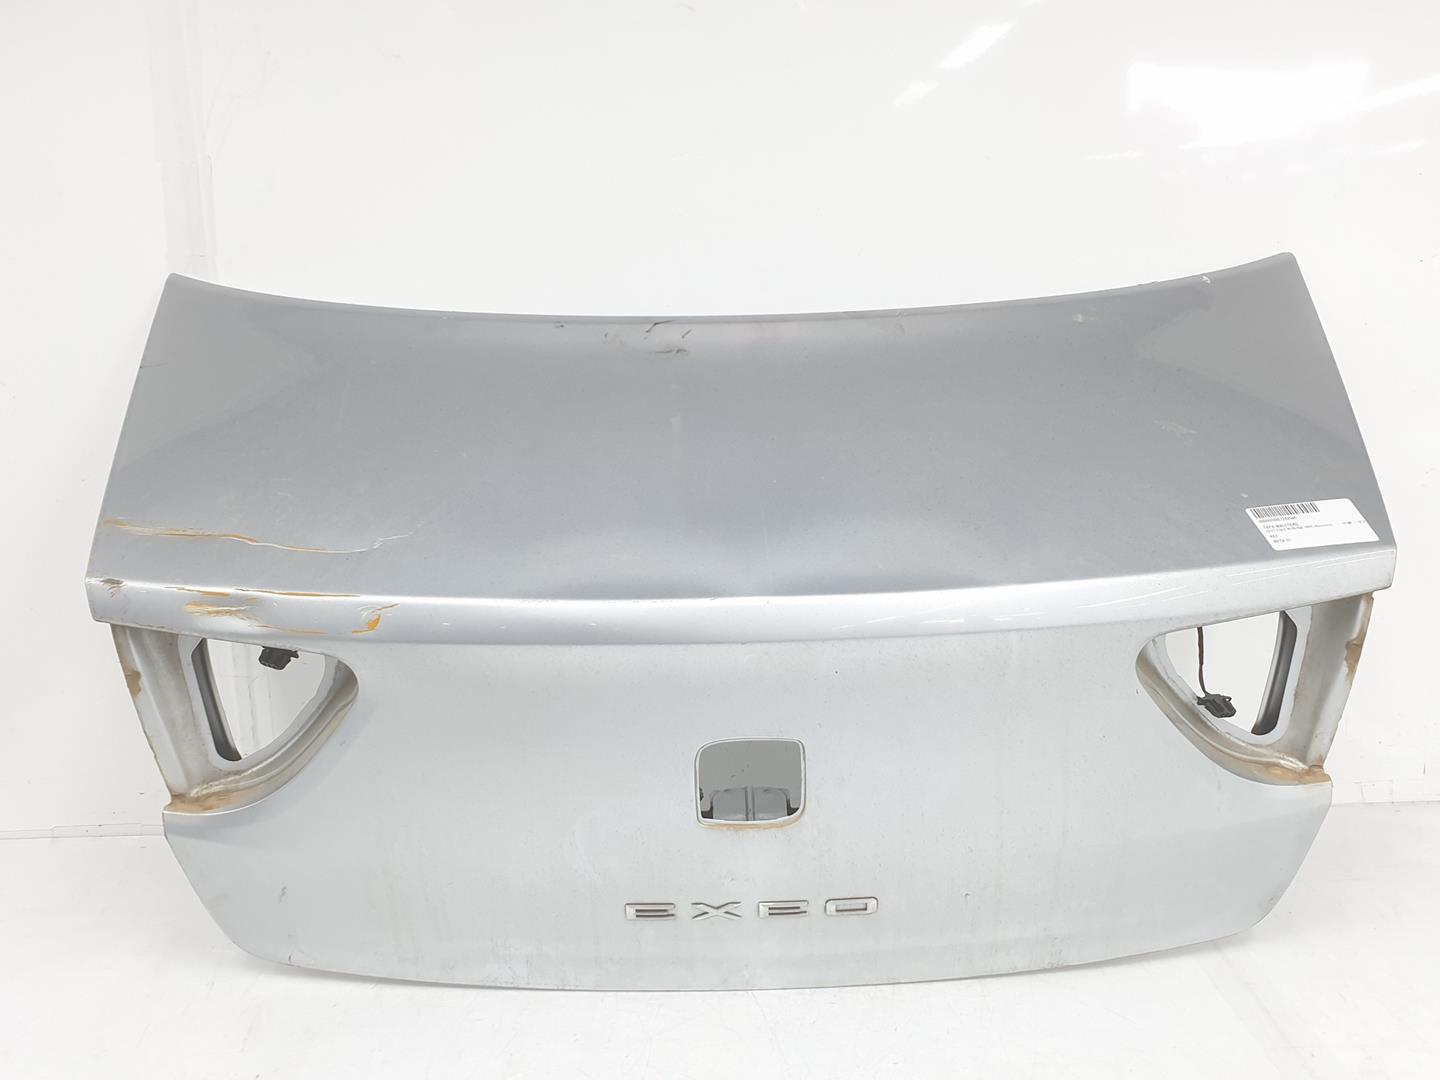 SEAT Exeo 1 generation (2009-2012) Bootlid Rear Boot 3R5827023, 3R5827023, COLORGRISPLATA 19688841